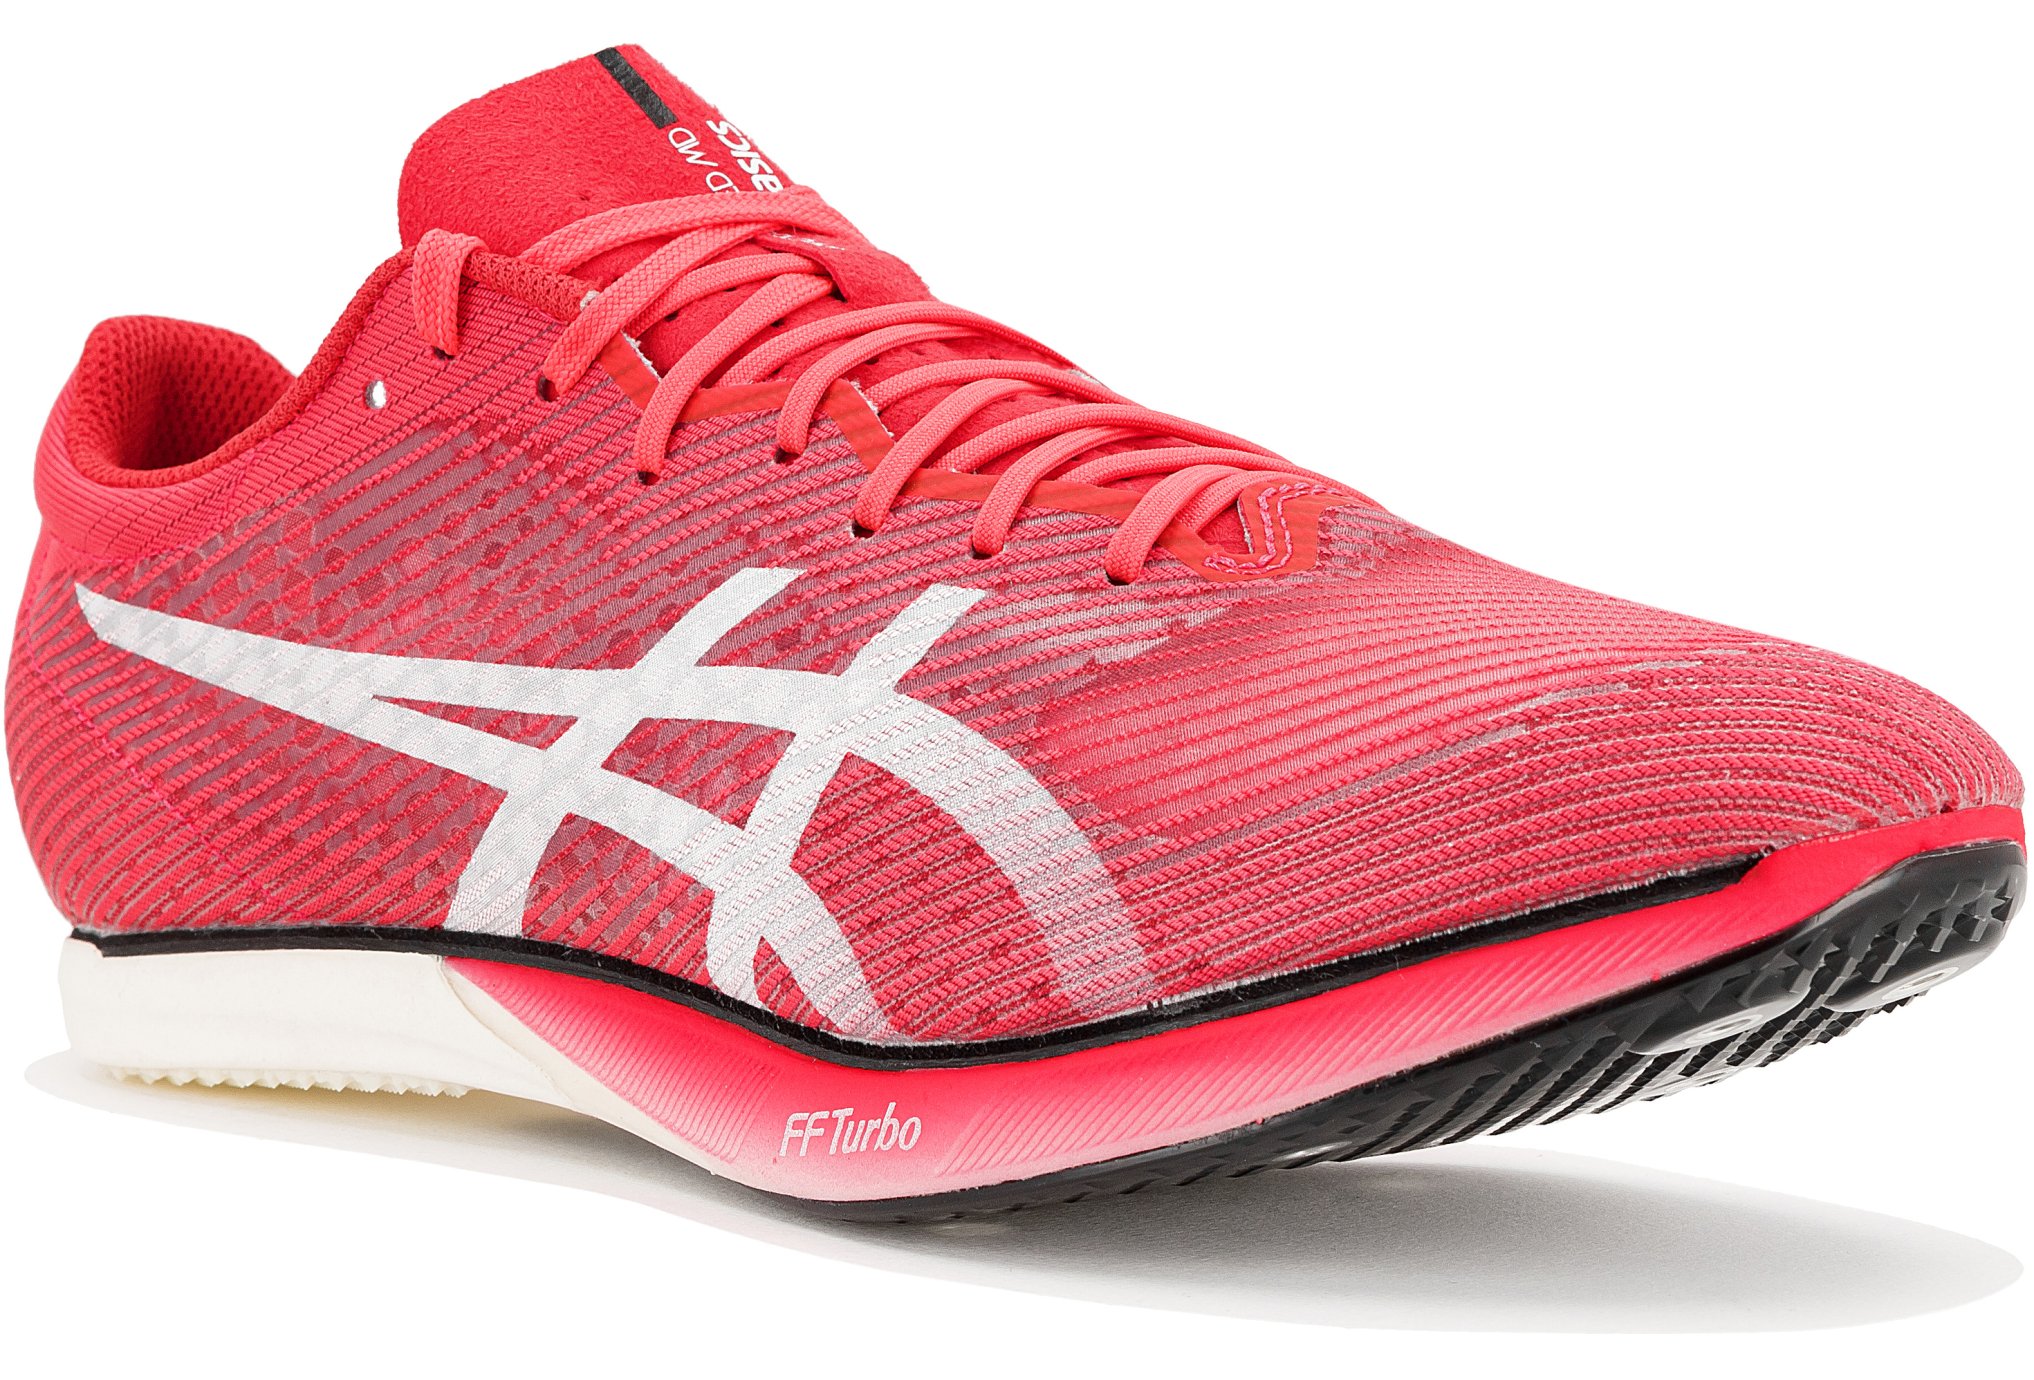 Asics Metaspeed MD M homme pas cher